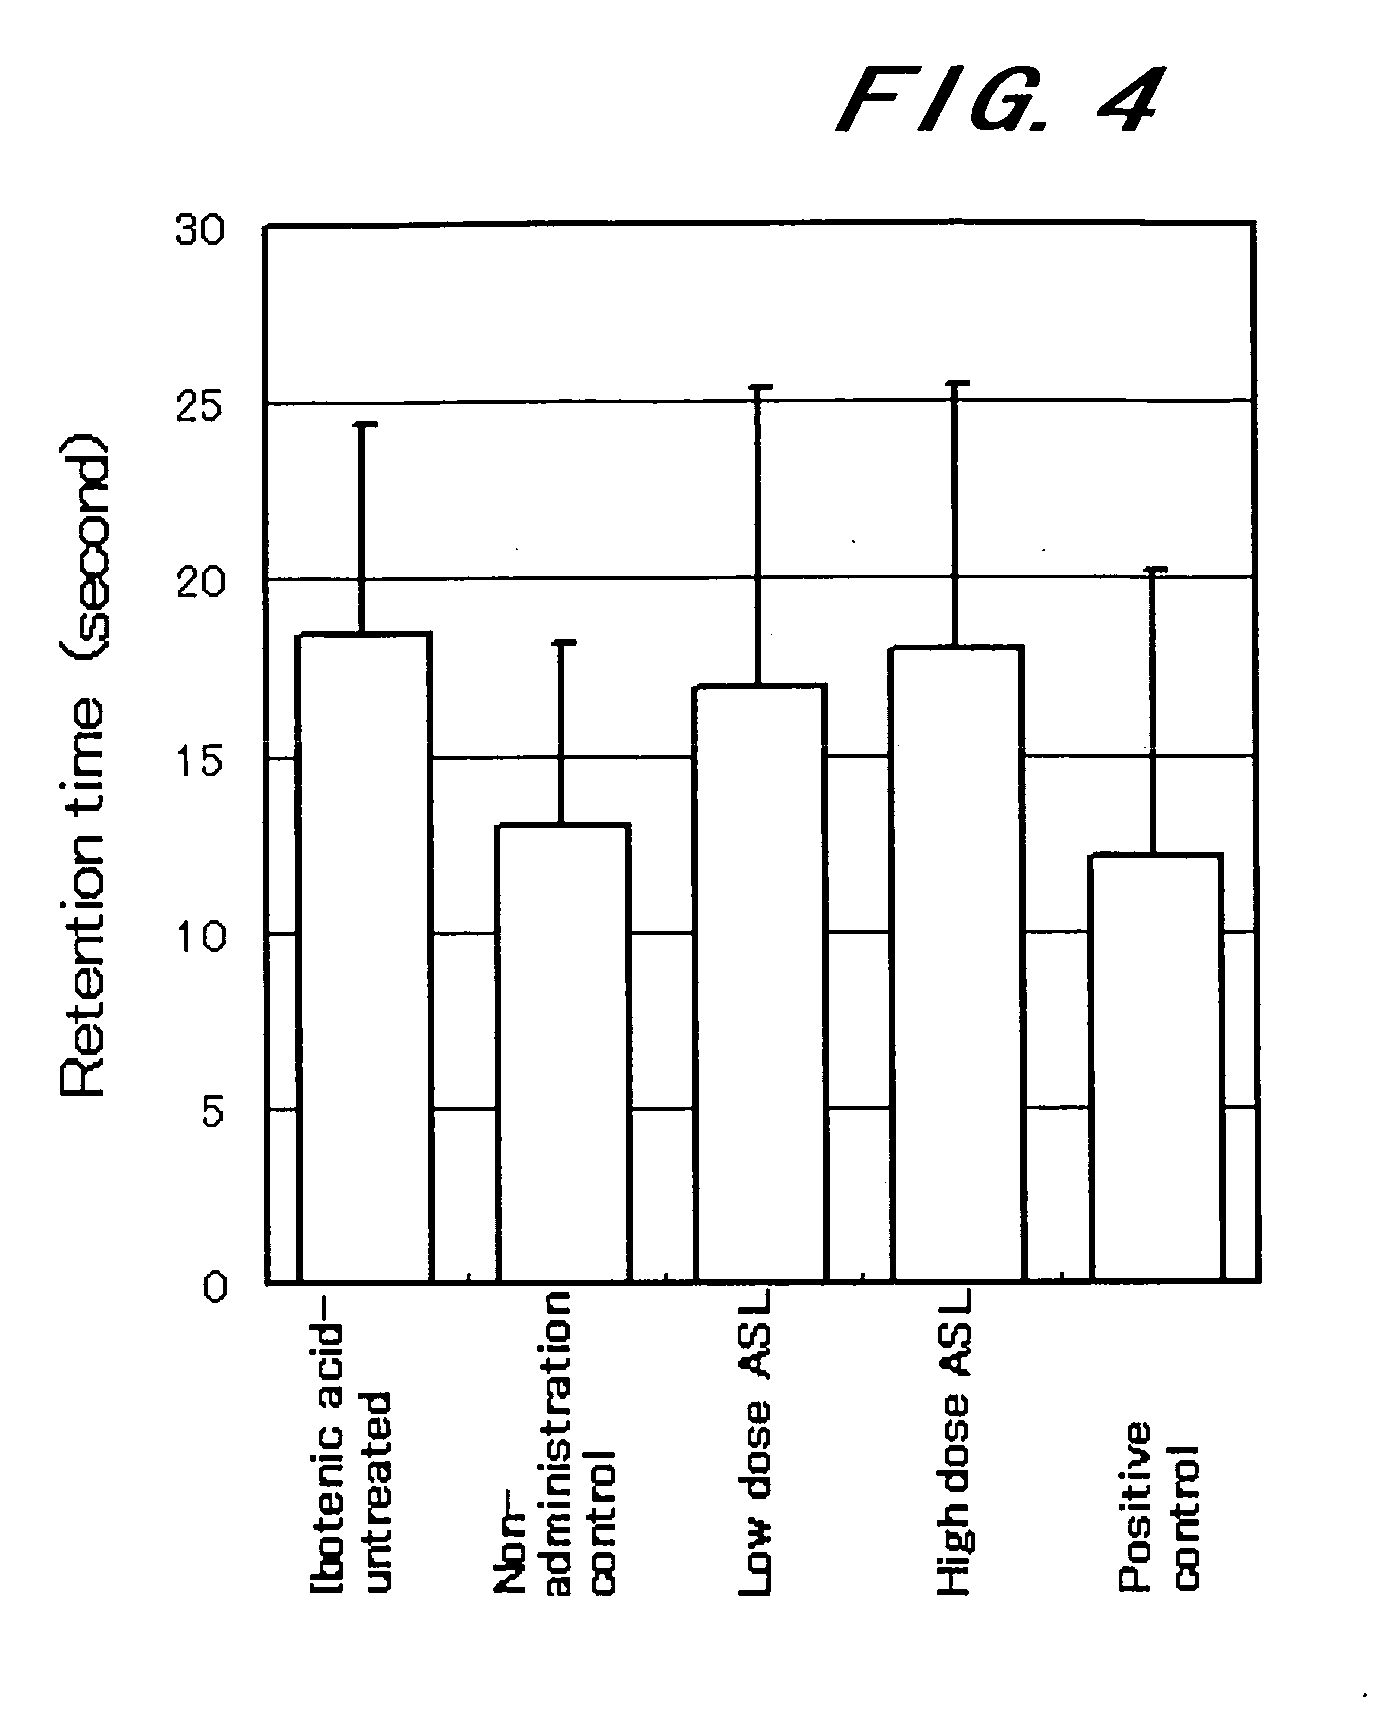 Composition for ameliorating cerebral function